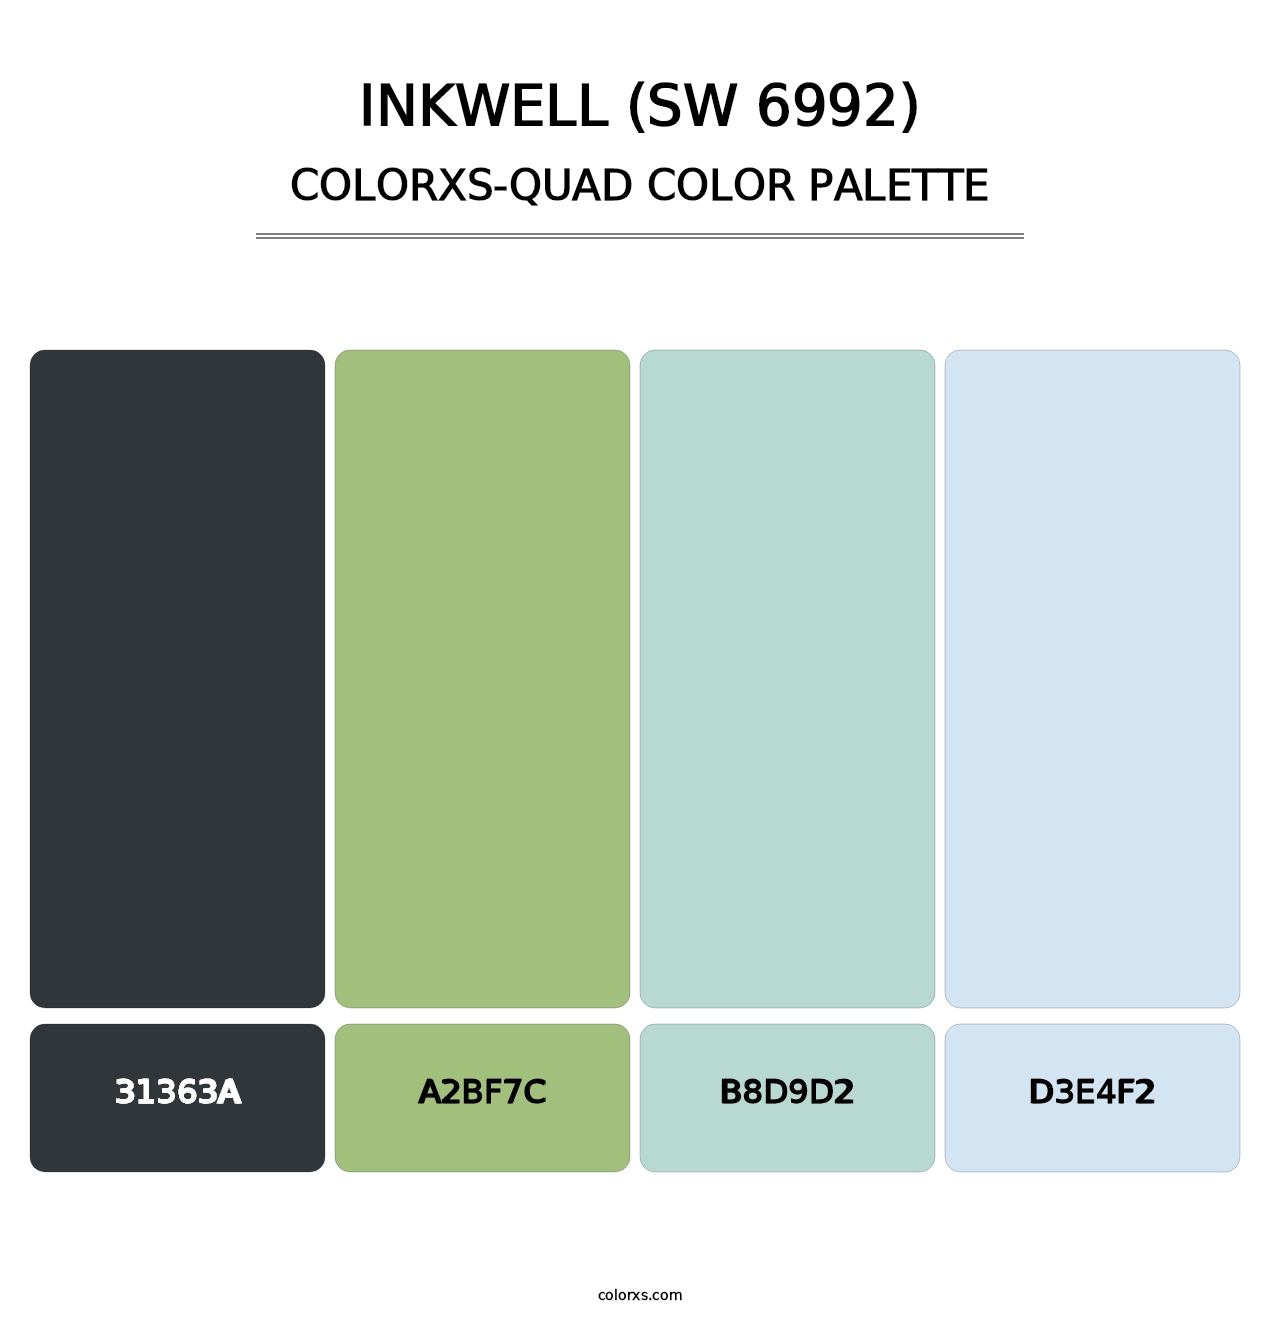 Inkwell (SW 6992) - Colorxs Quad Palette